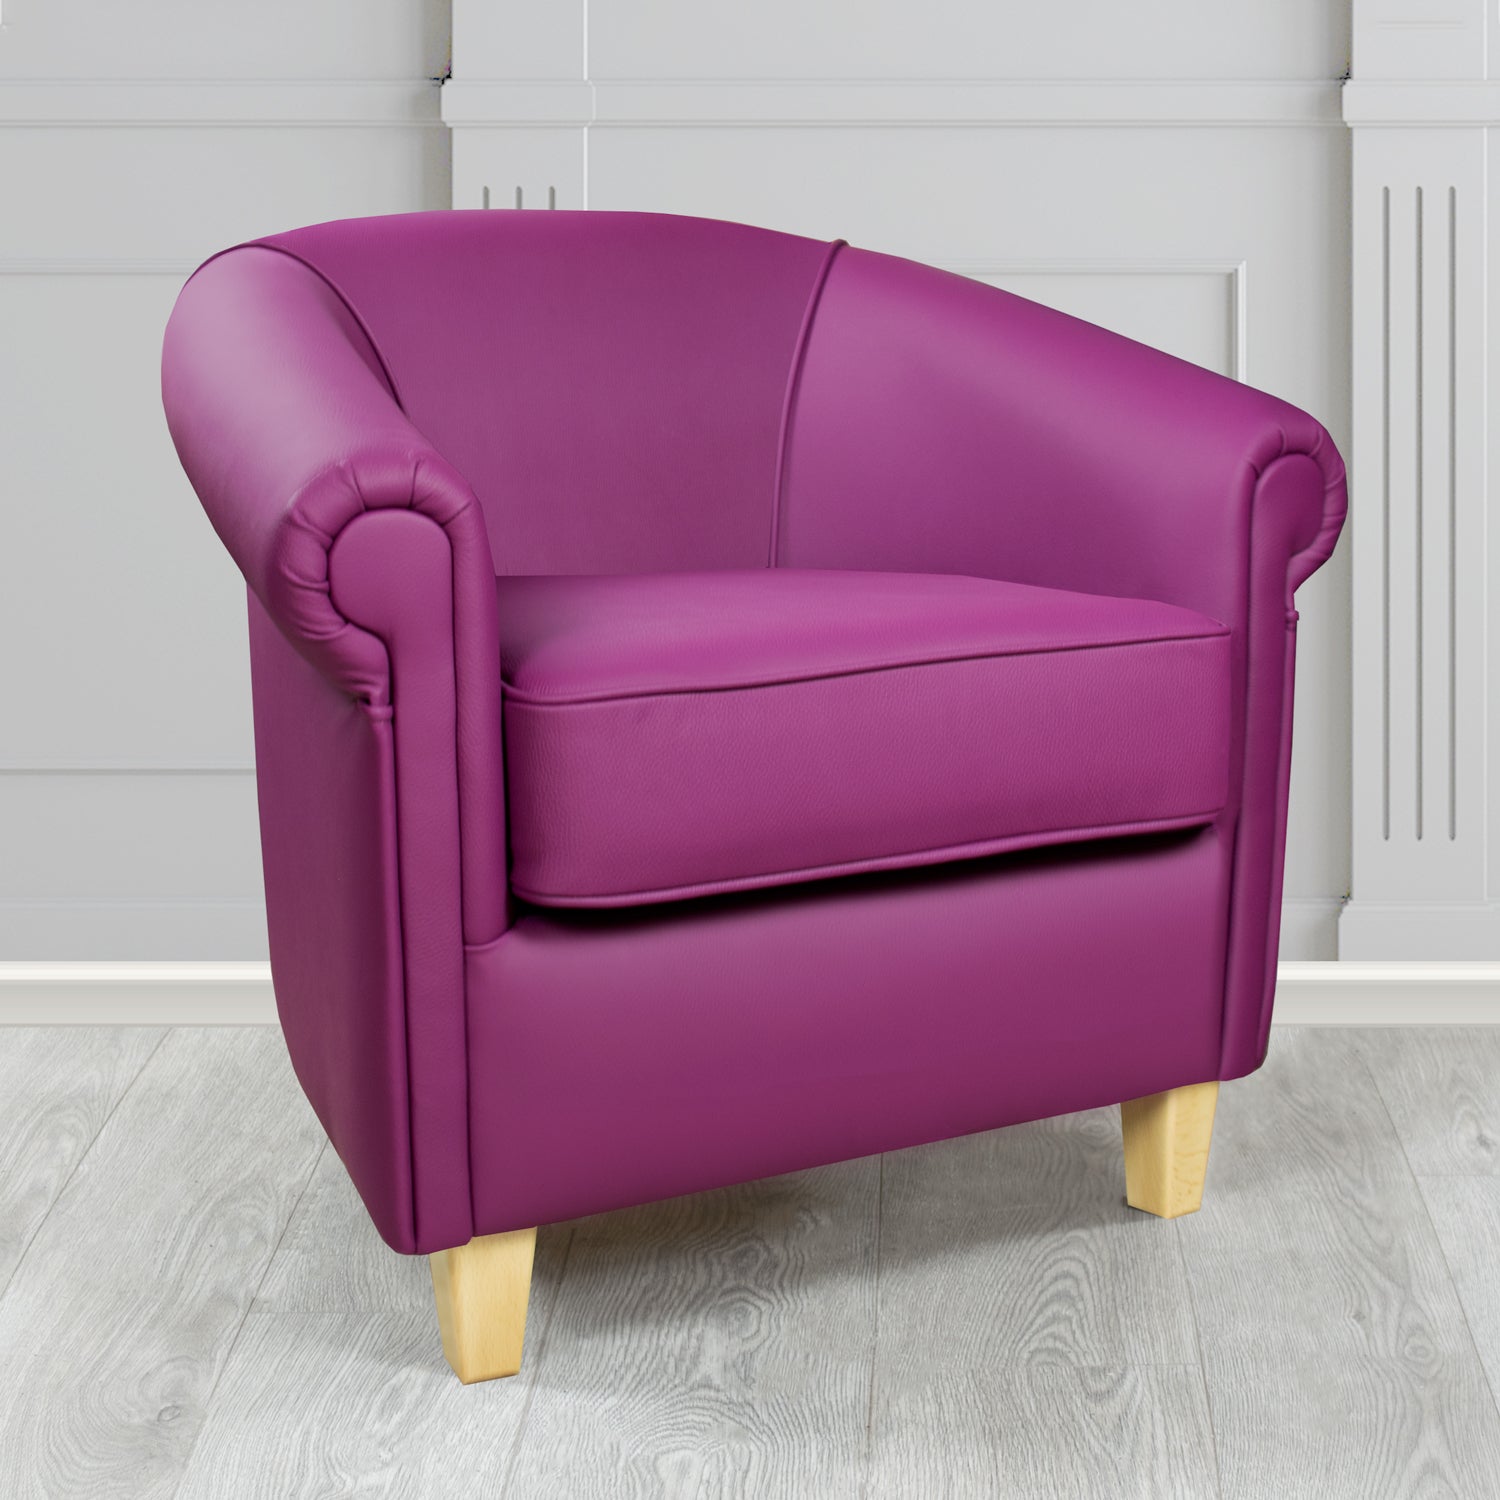 Siena Tub Chair in Crib 5 Shelly Wineberry Genuine Leather - The Tub Chair Shop